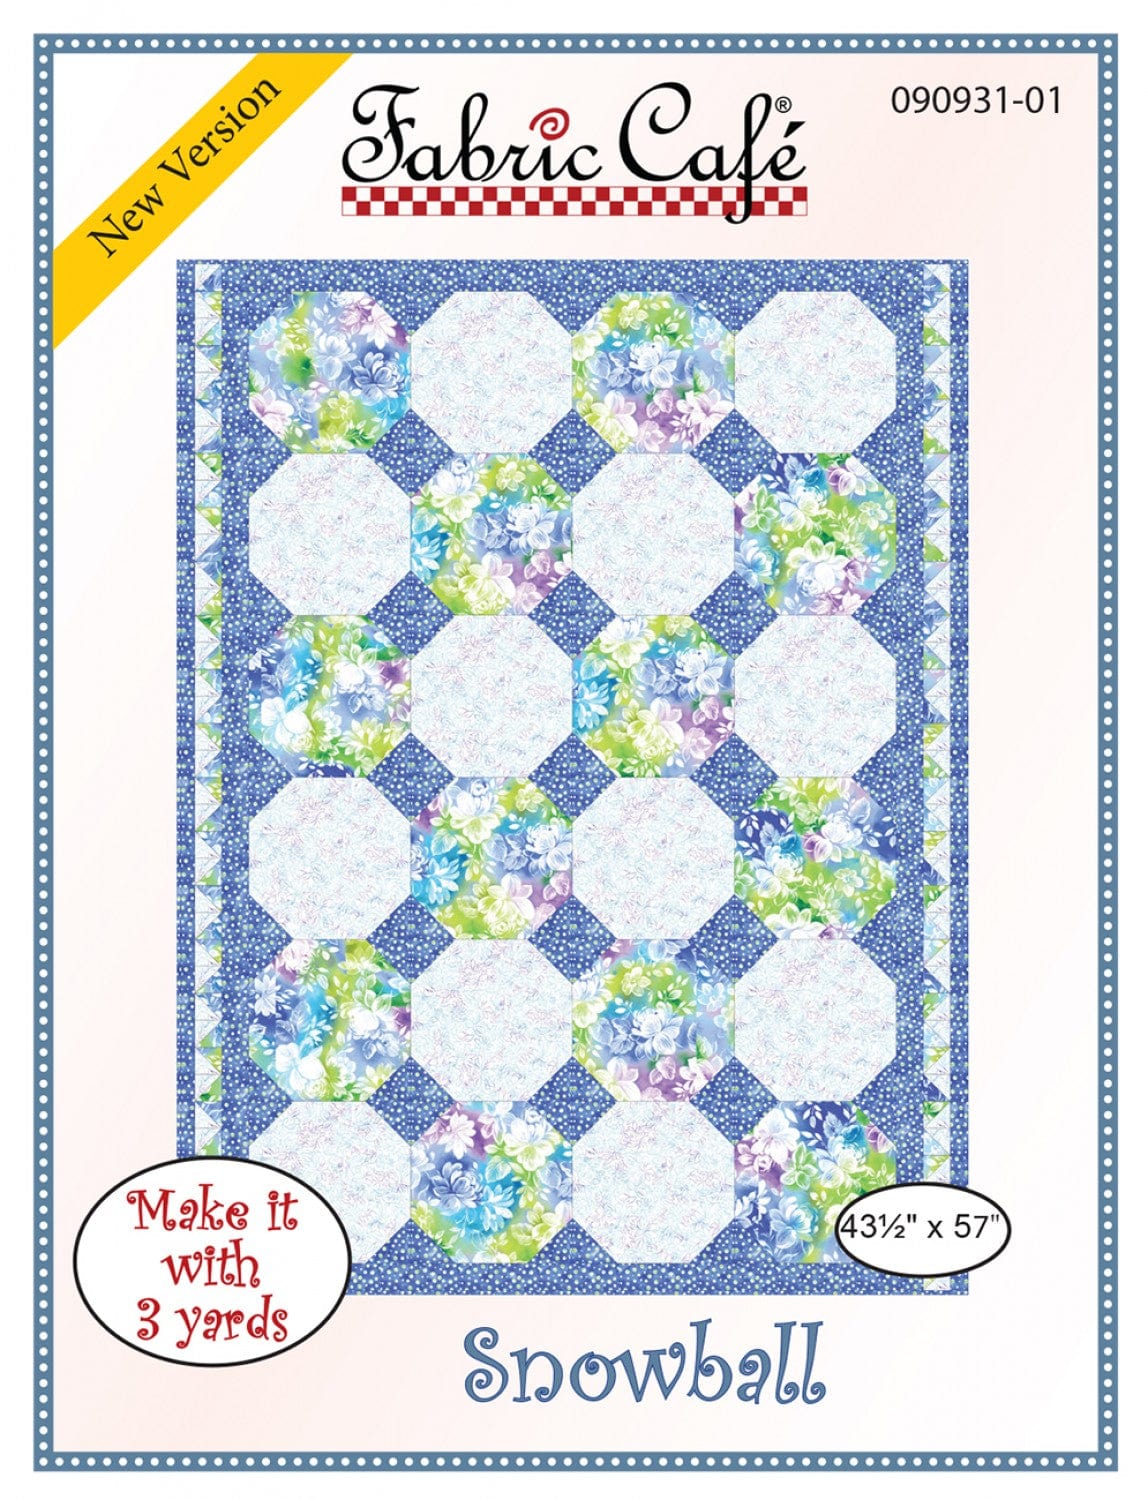 Snowball Pattern - 3-yard Quilt - Fabric Cafe